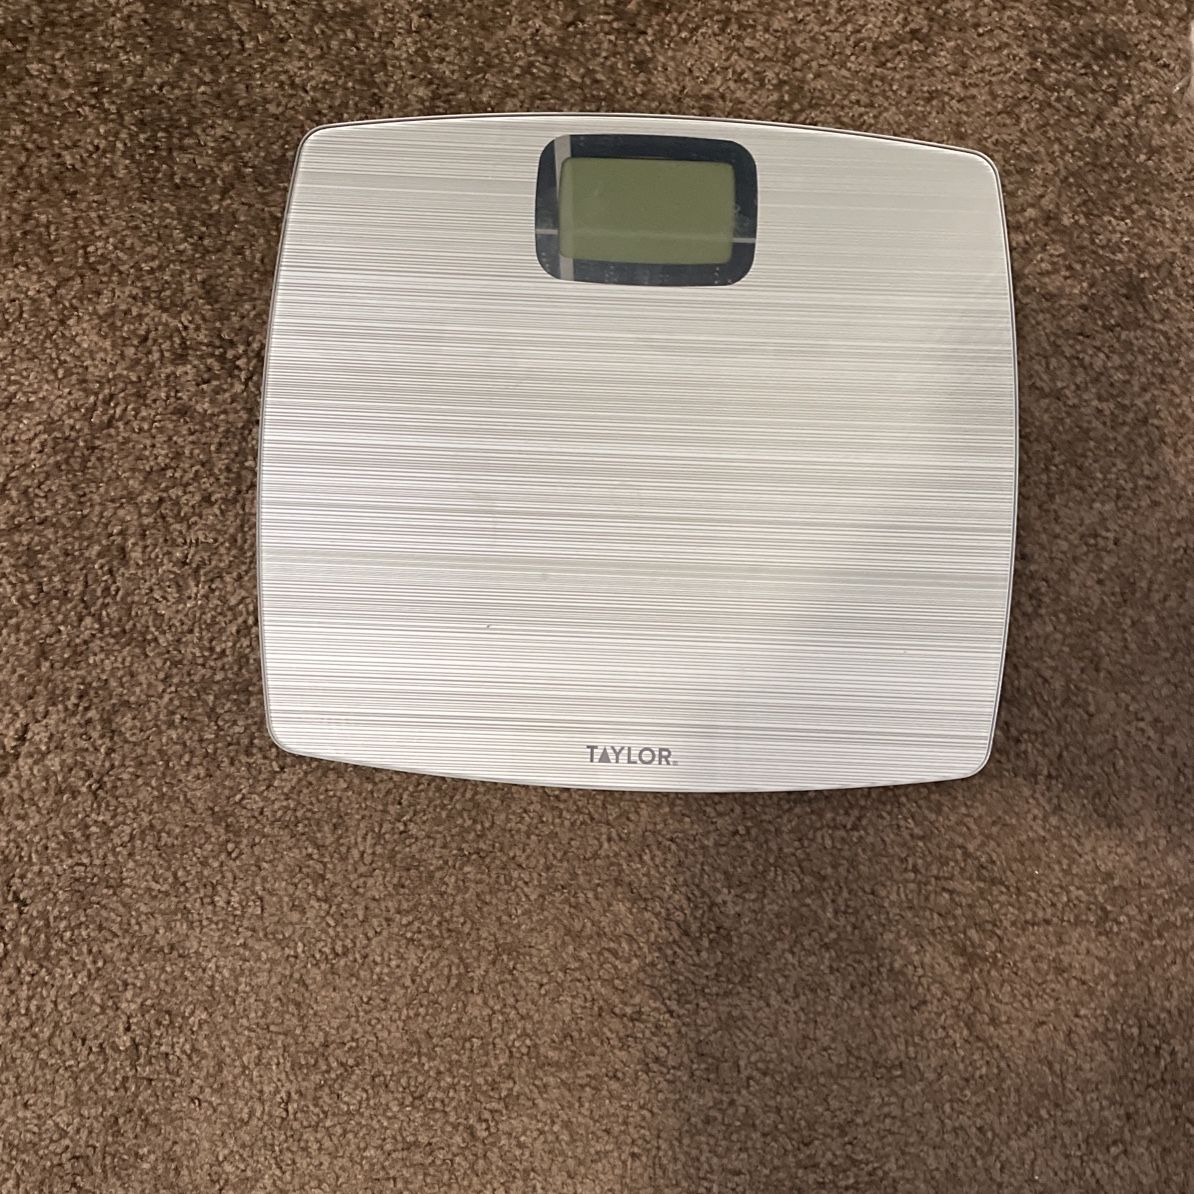 Weight Scale for Sale in Mesa, AZ - OfferUp